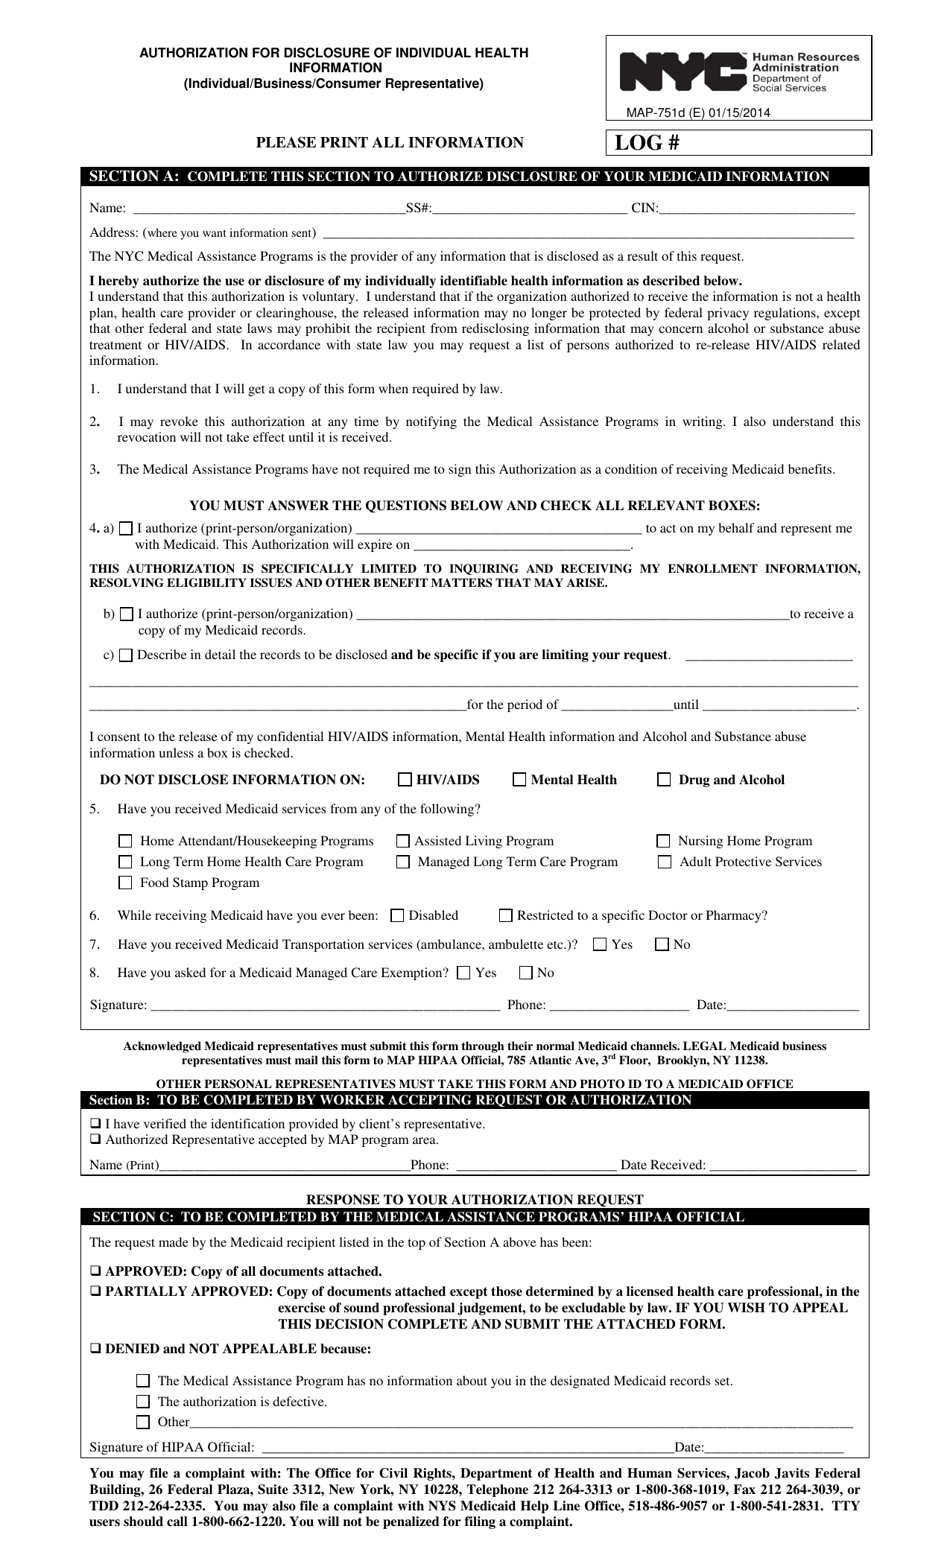 Form MAP-751D Authorization for Disclosure of Individual Health Information (Individual / Business / Consumer Representative) - New York City, Page 1